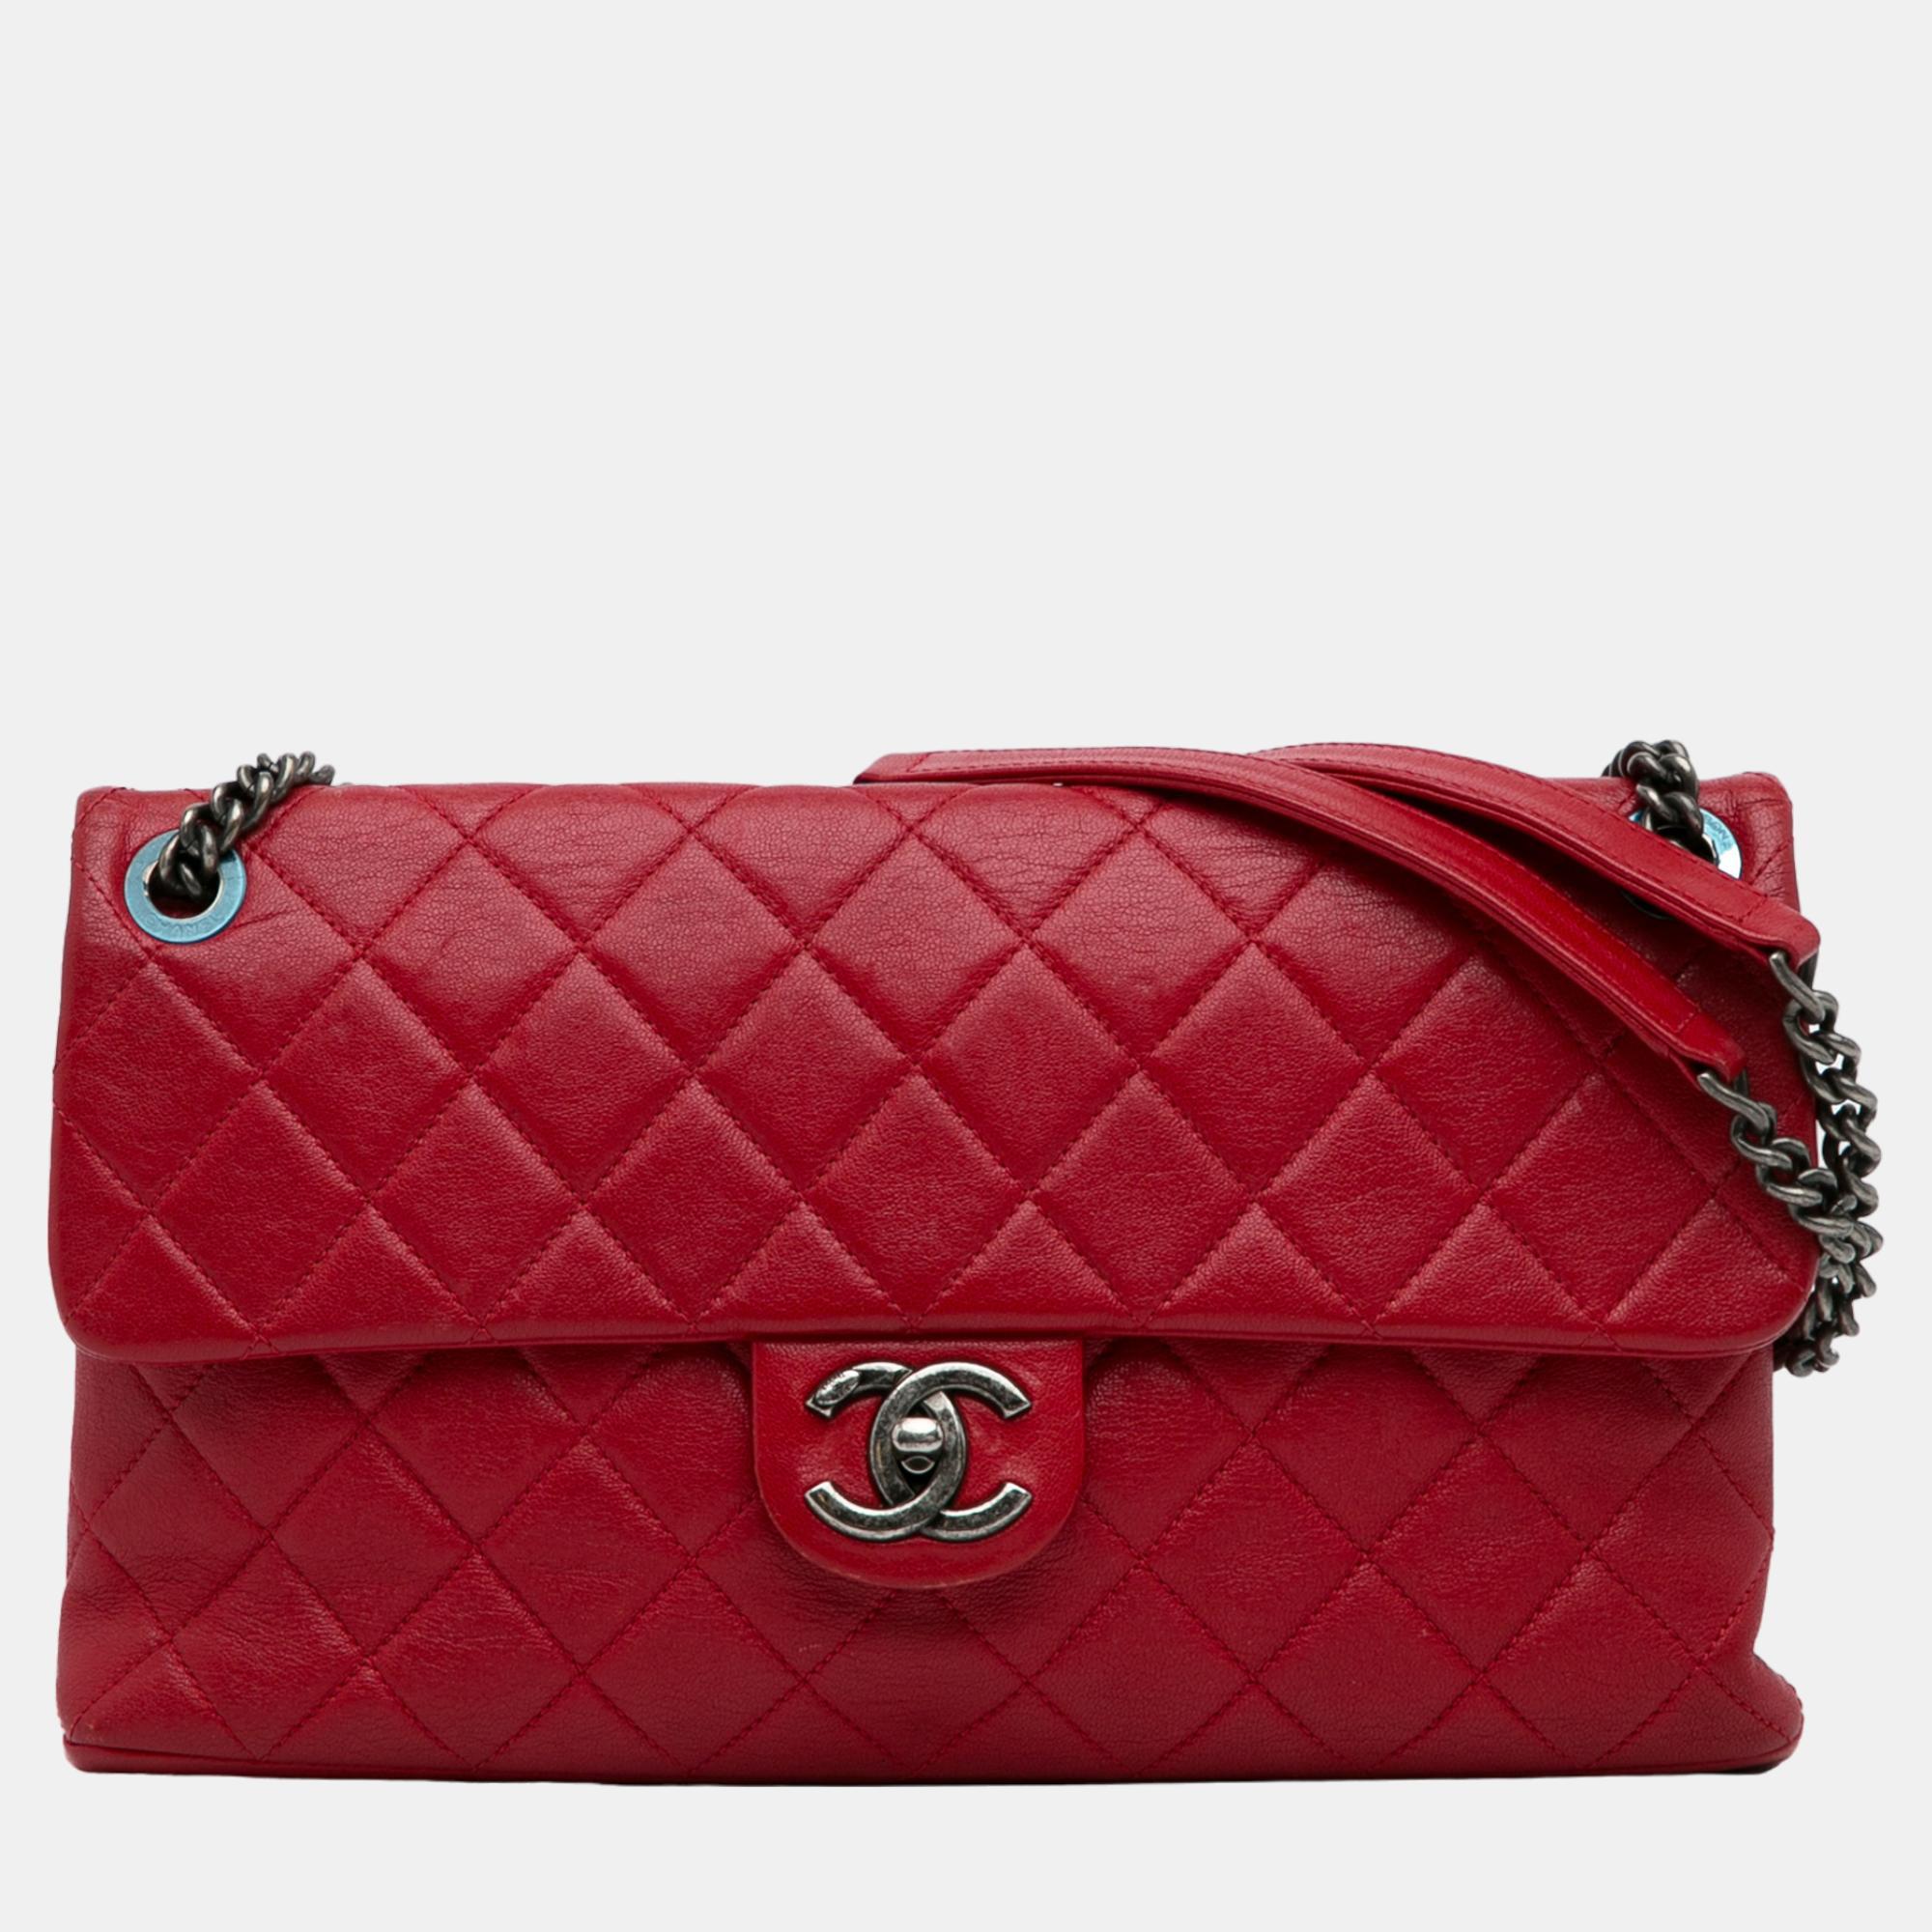 Chanel Red 31 Rue Cambon Flap Bag